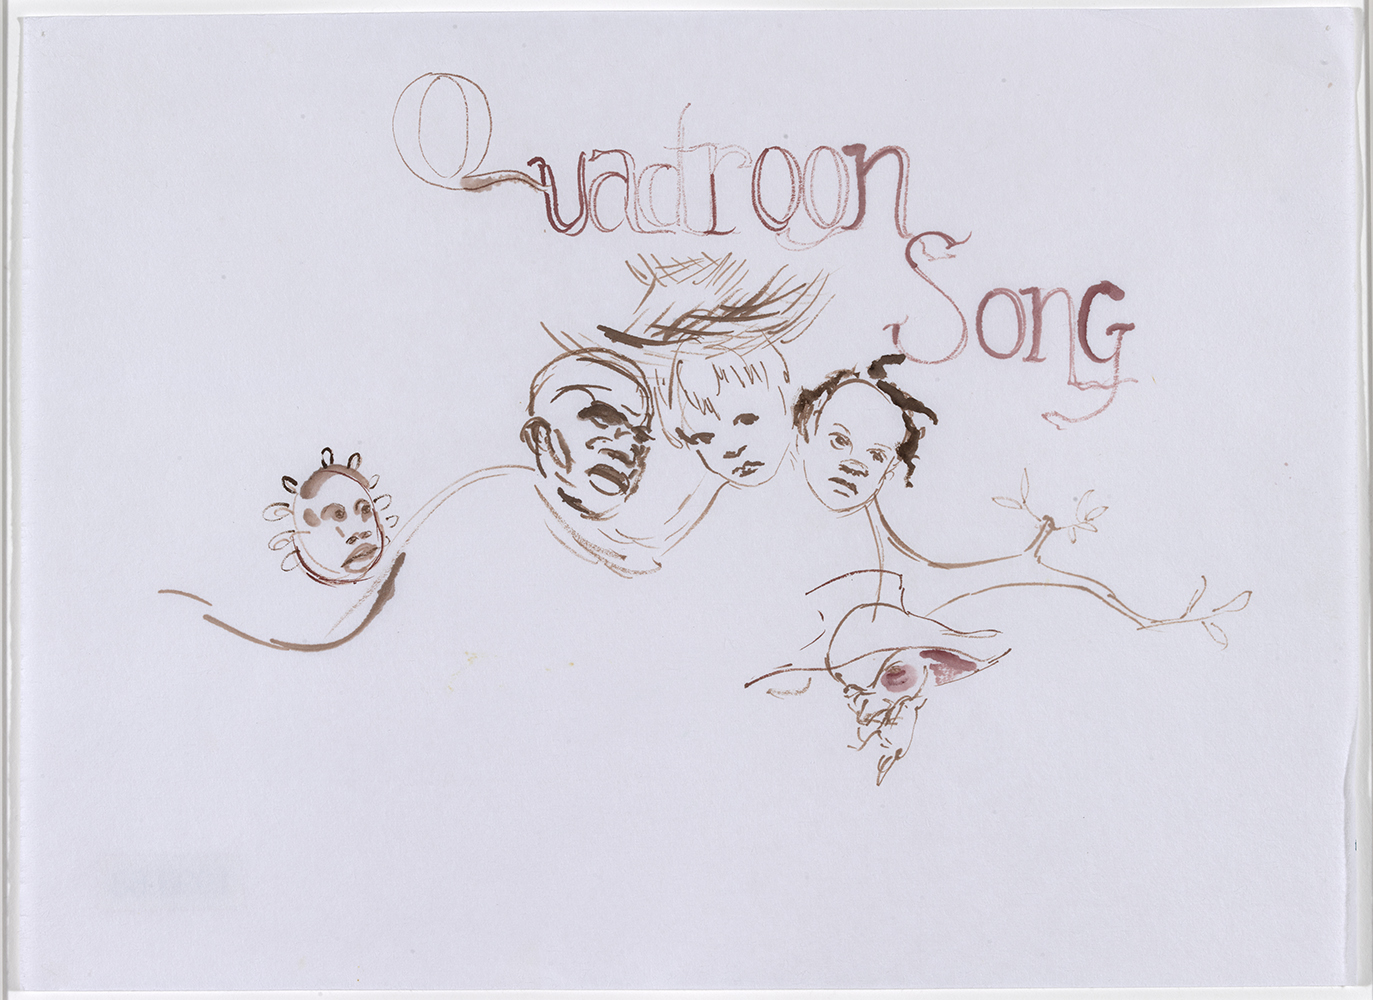 Gouache drawing of five faces depicting five people of varying shades of skin tone and facial expressions. The title “Quadroon Song” is written at the top of the drawing